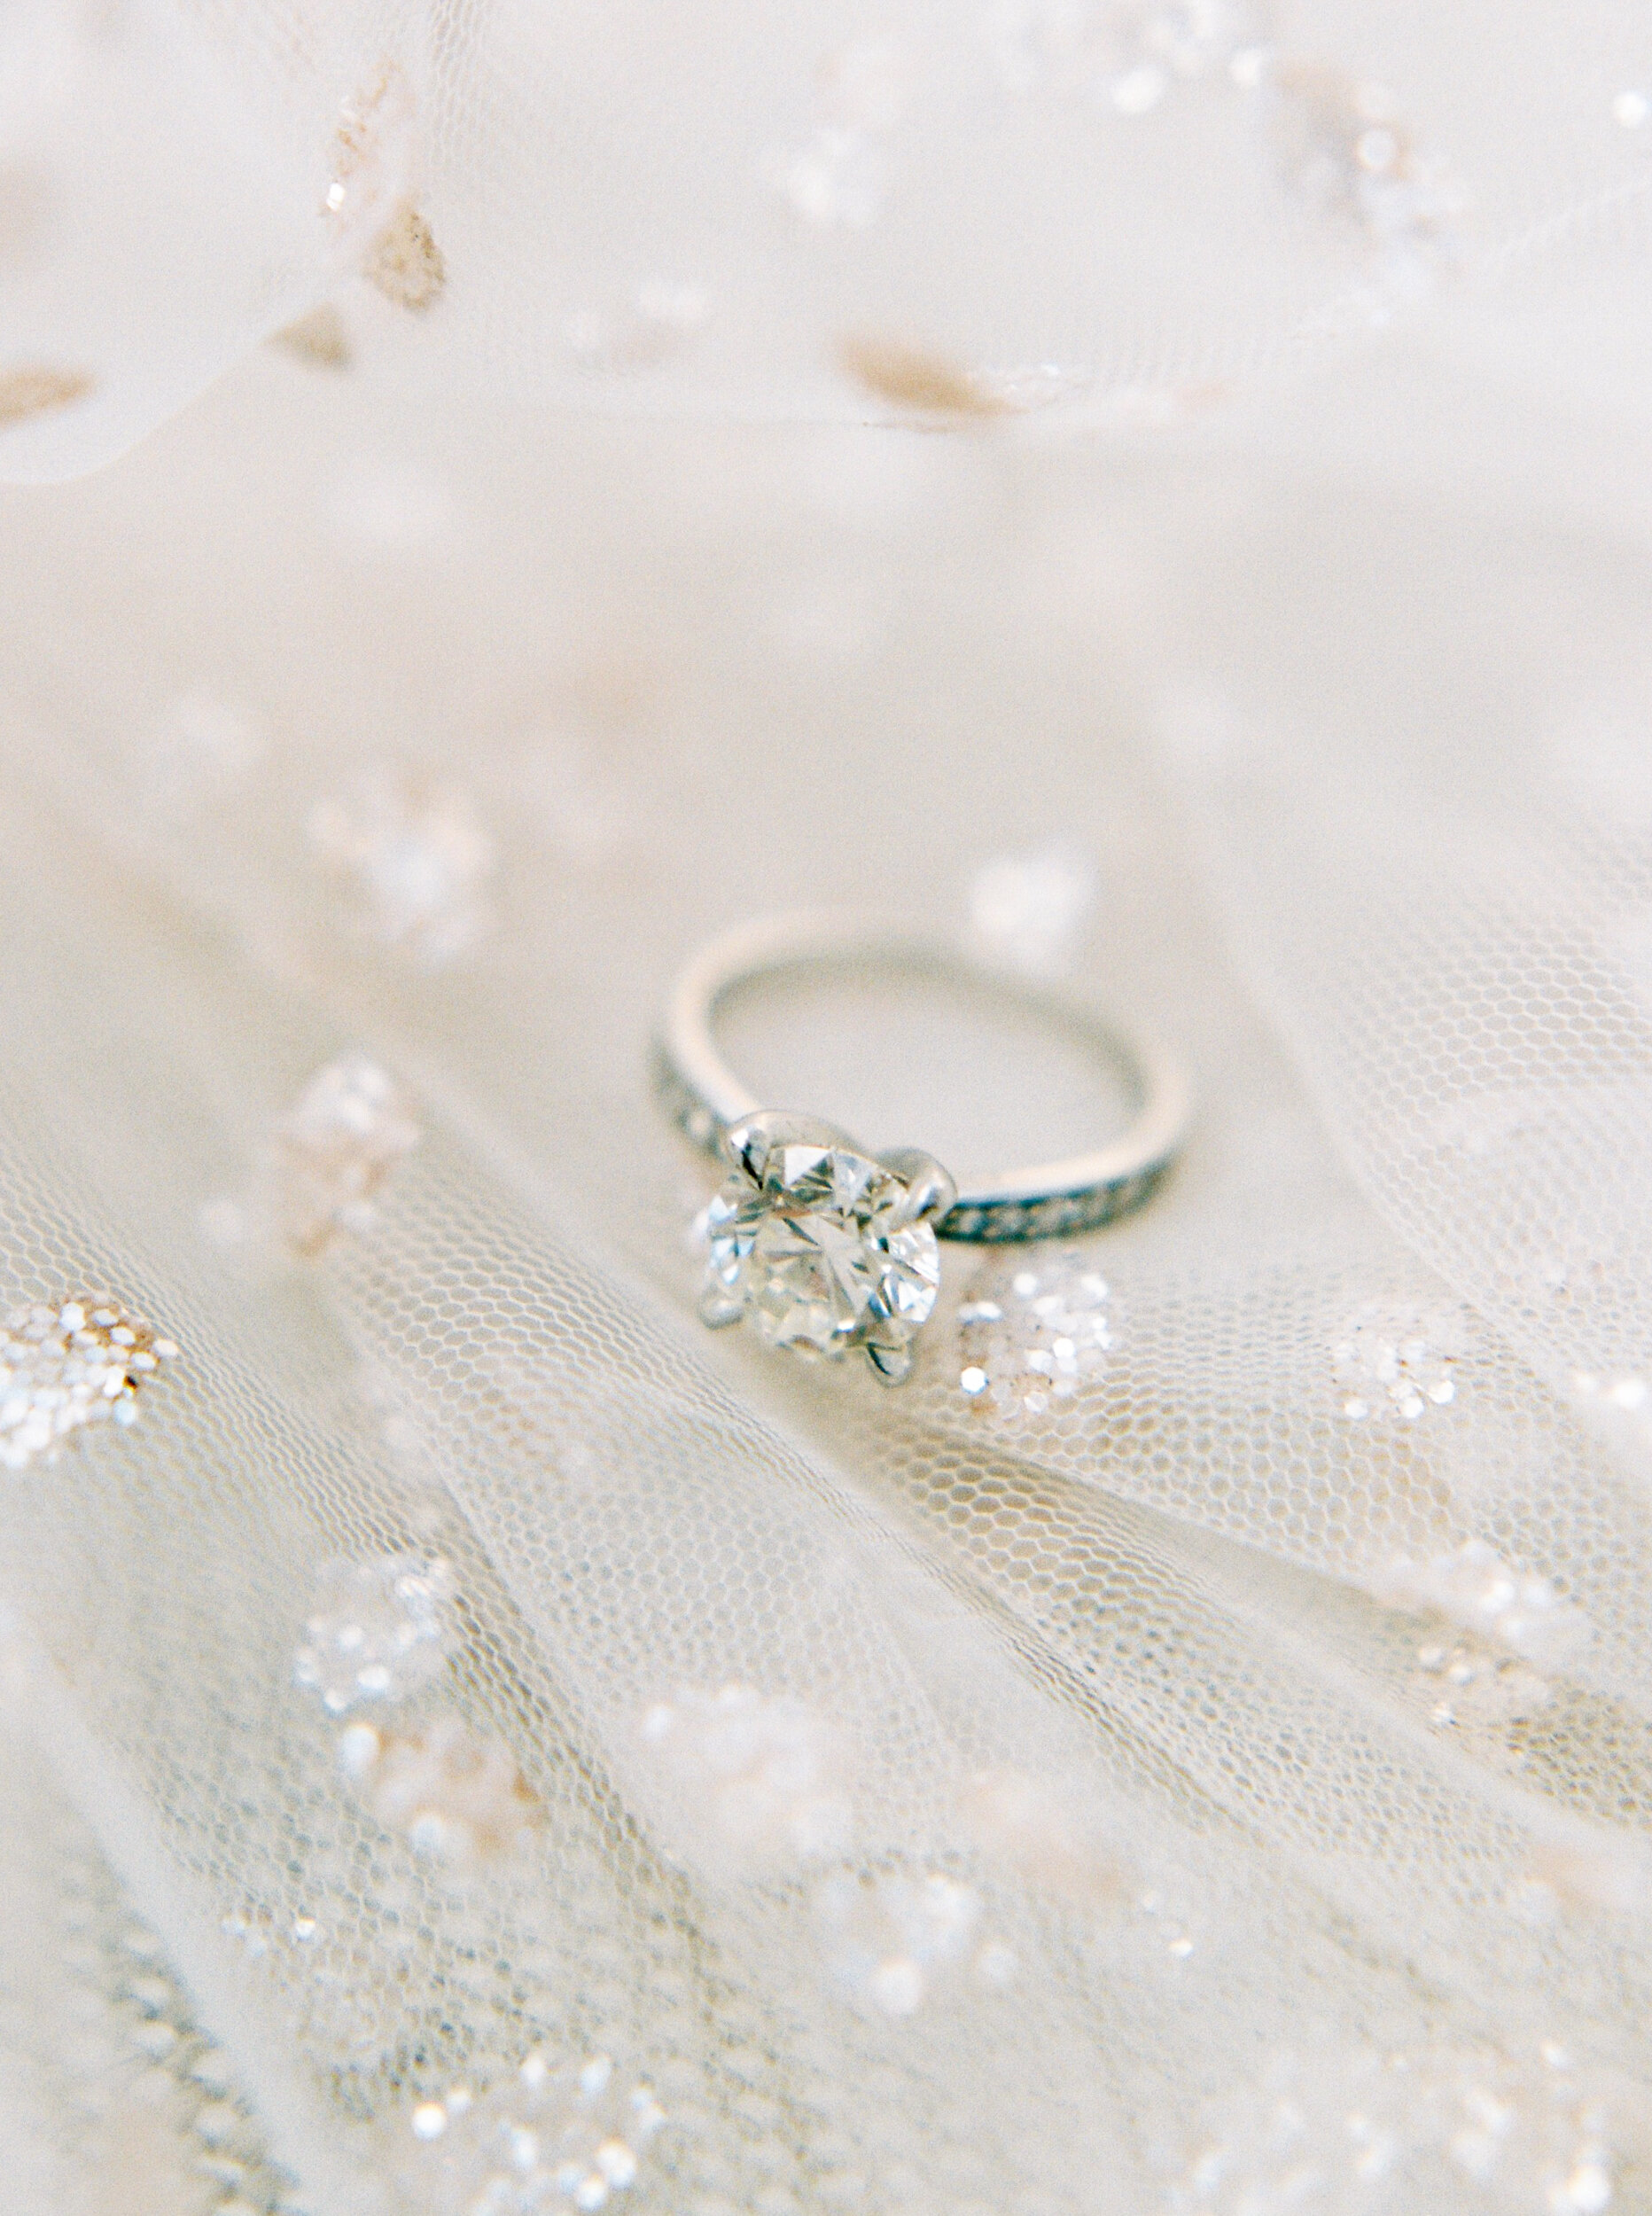 How To Take Better Ring Photos